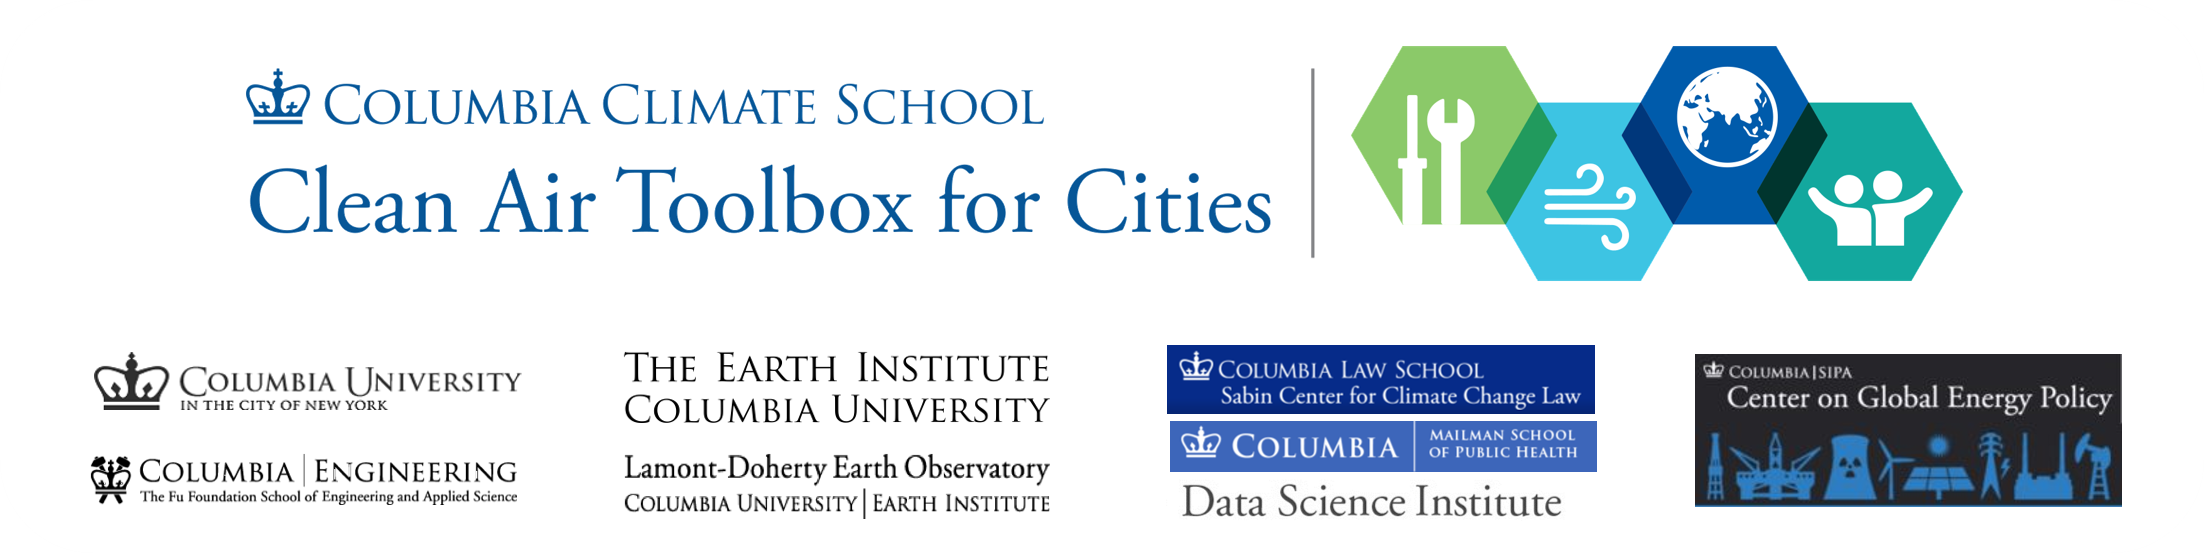 Columbia University Clean Air Toolbox for Cities